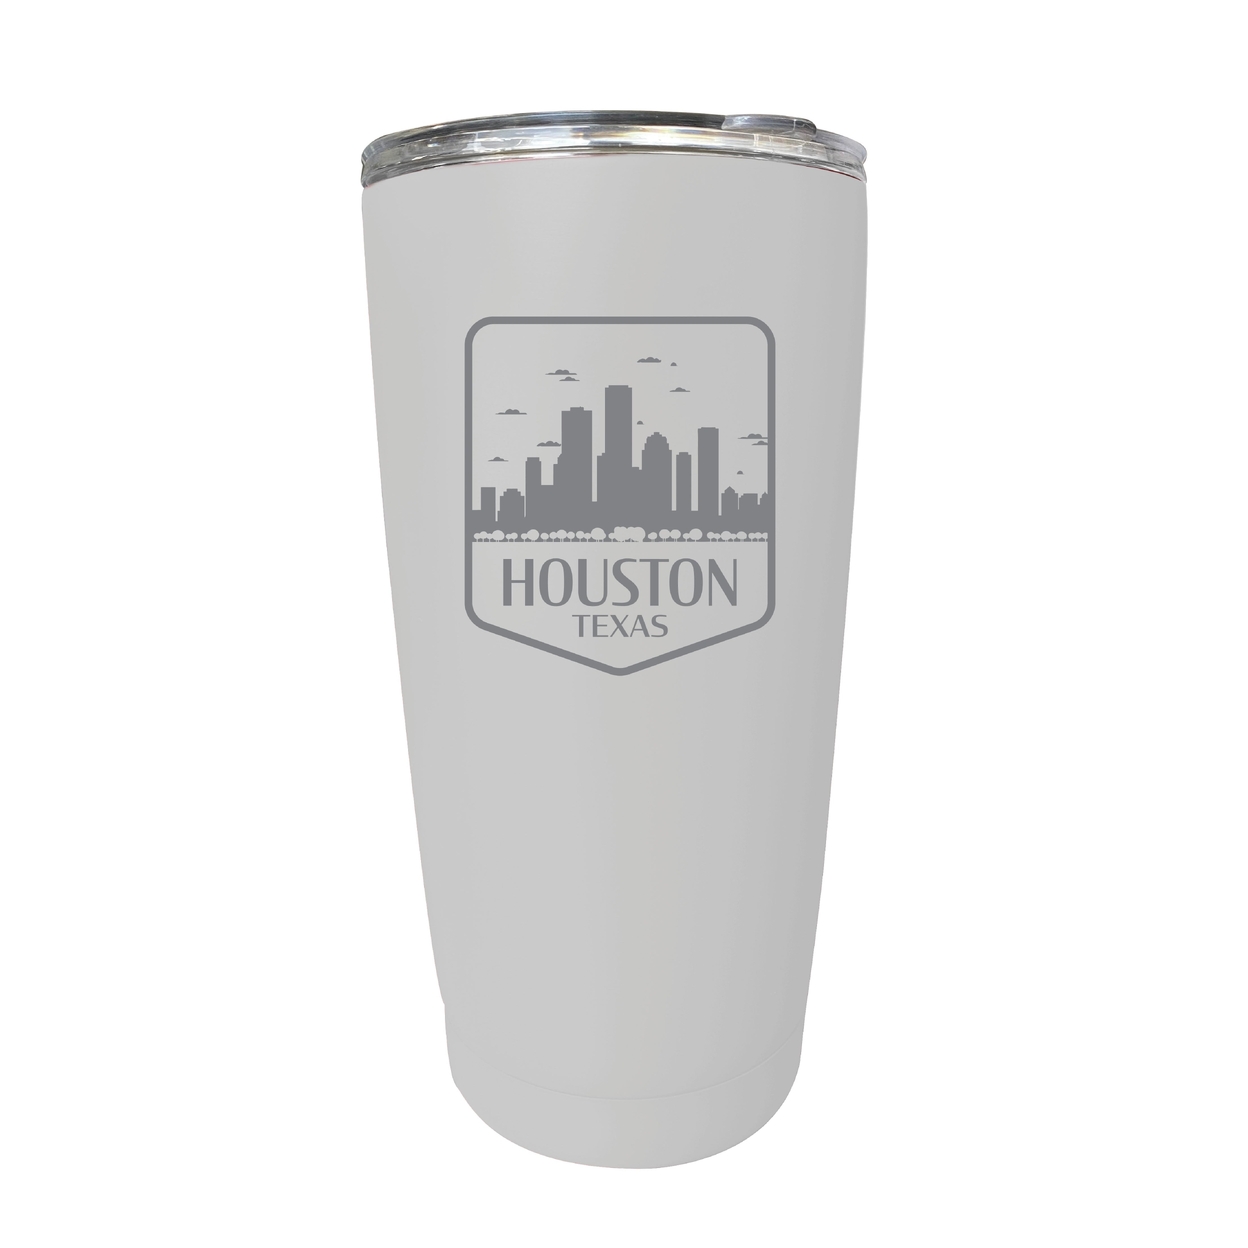 Houston Texas Souvenir 16 Oz Engraved Stainless Steel Insulated Tumbler - Red,,2-Pack